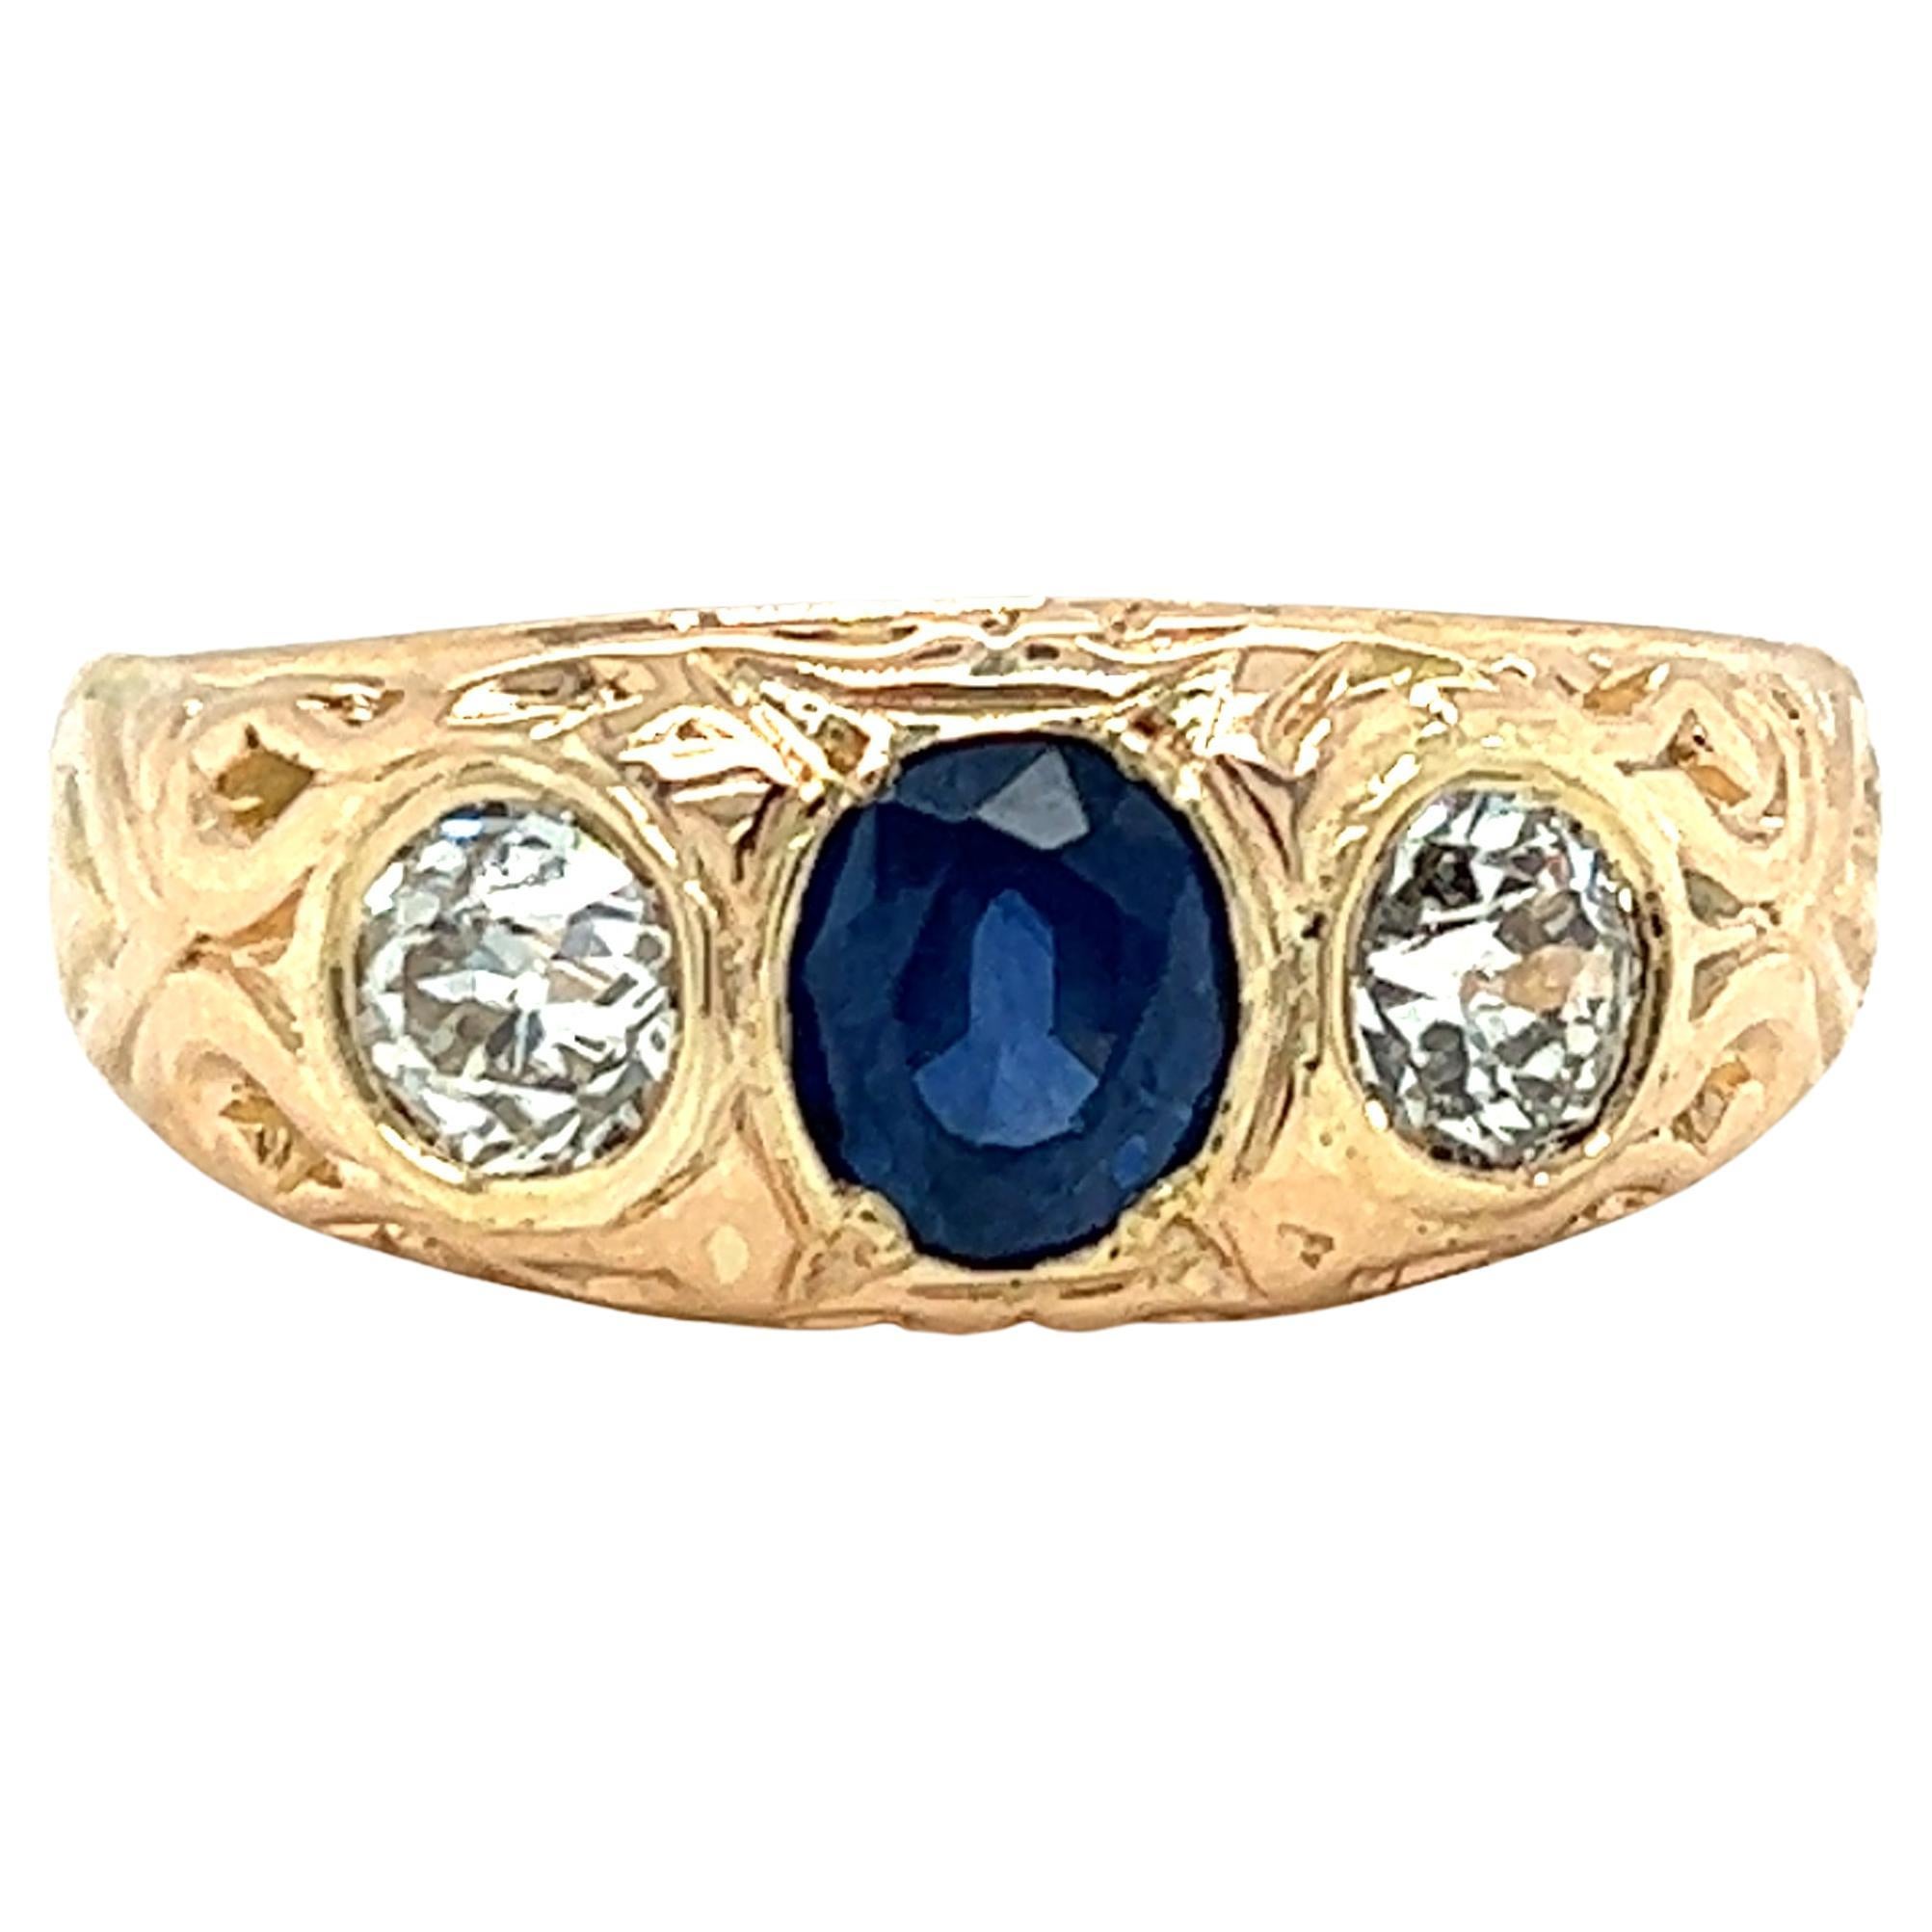 Edwardian Sapphire and Old Mine Cut Diamond Ring in 14k Gold